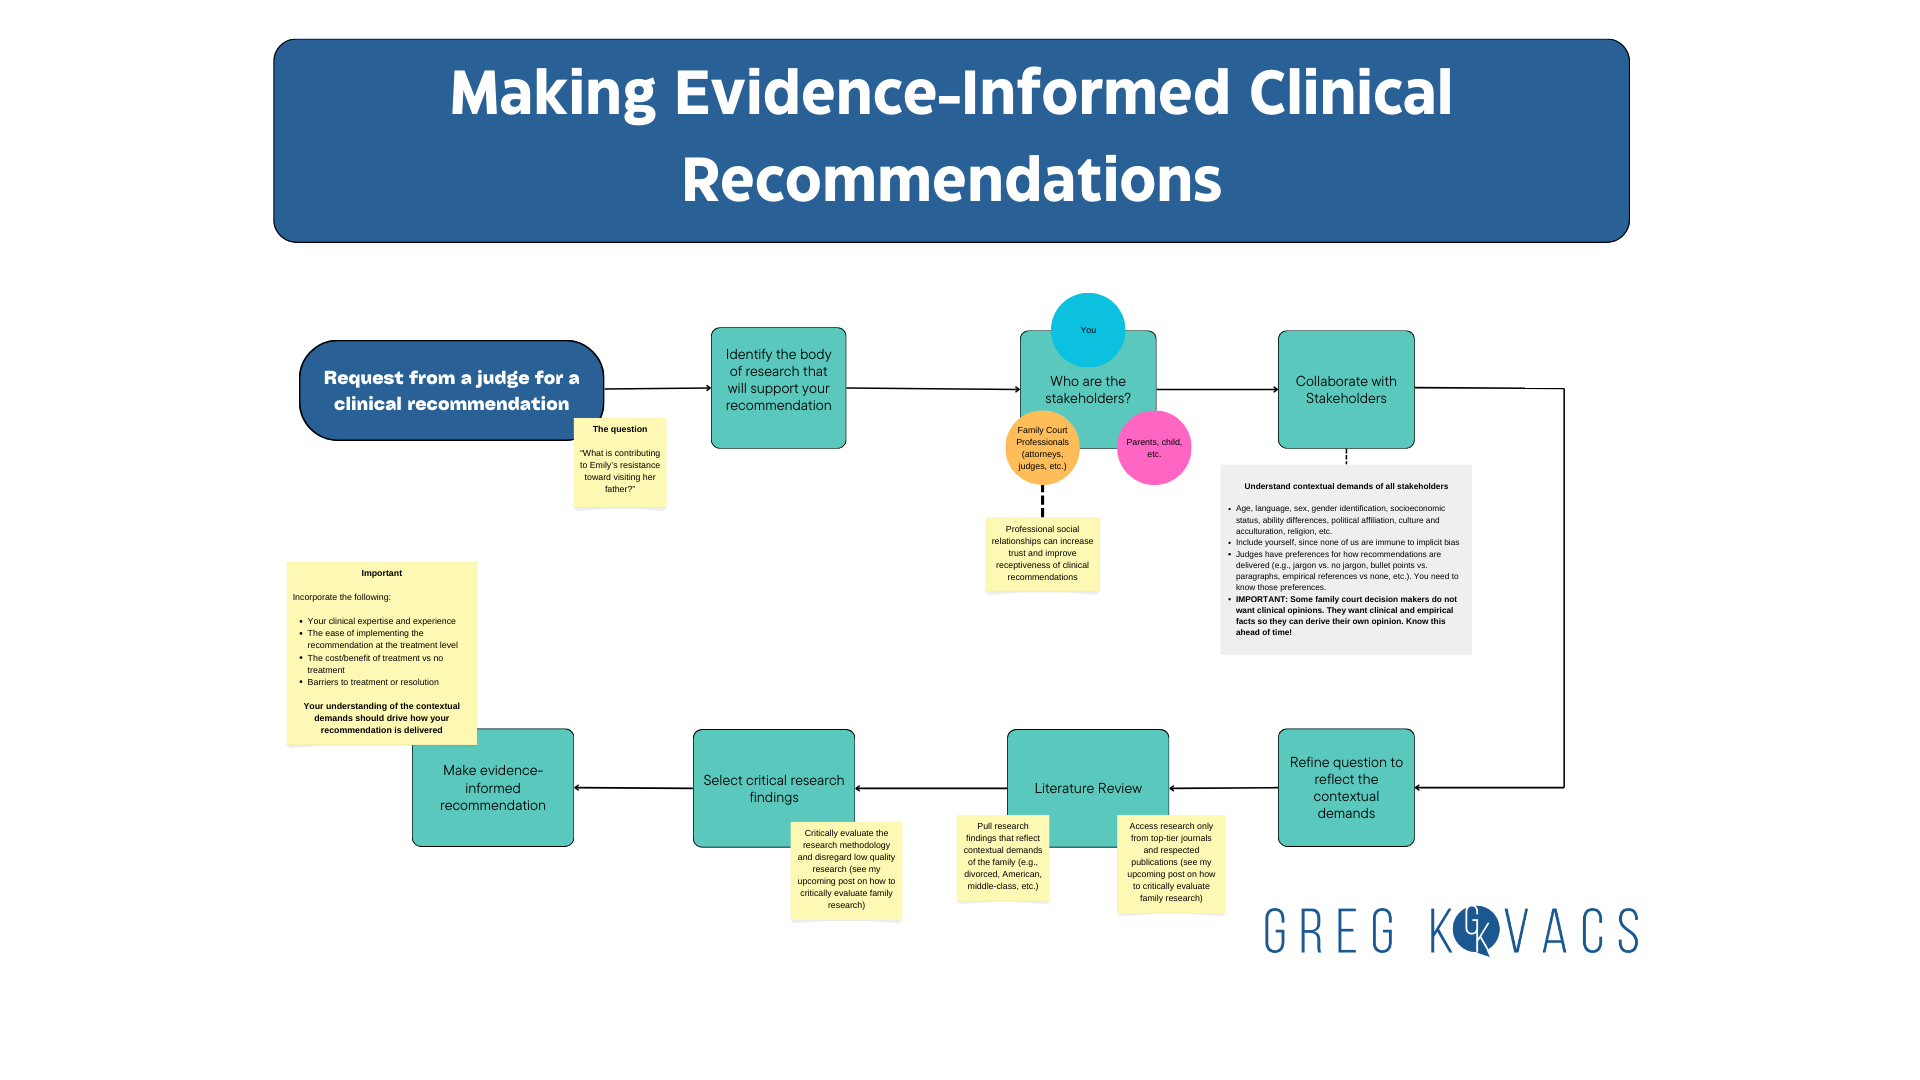 Schematic showing the process of evidence-informed decision making